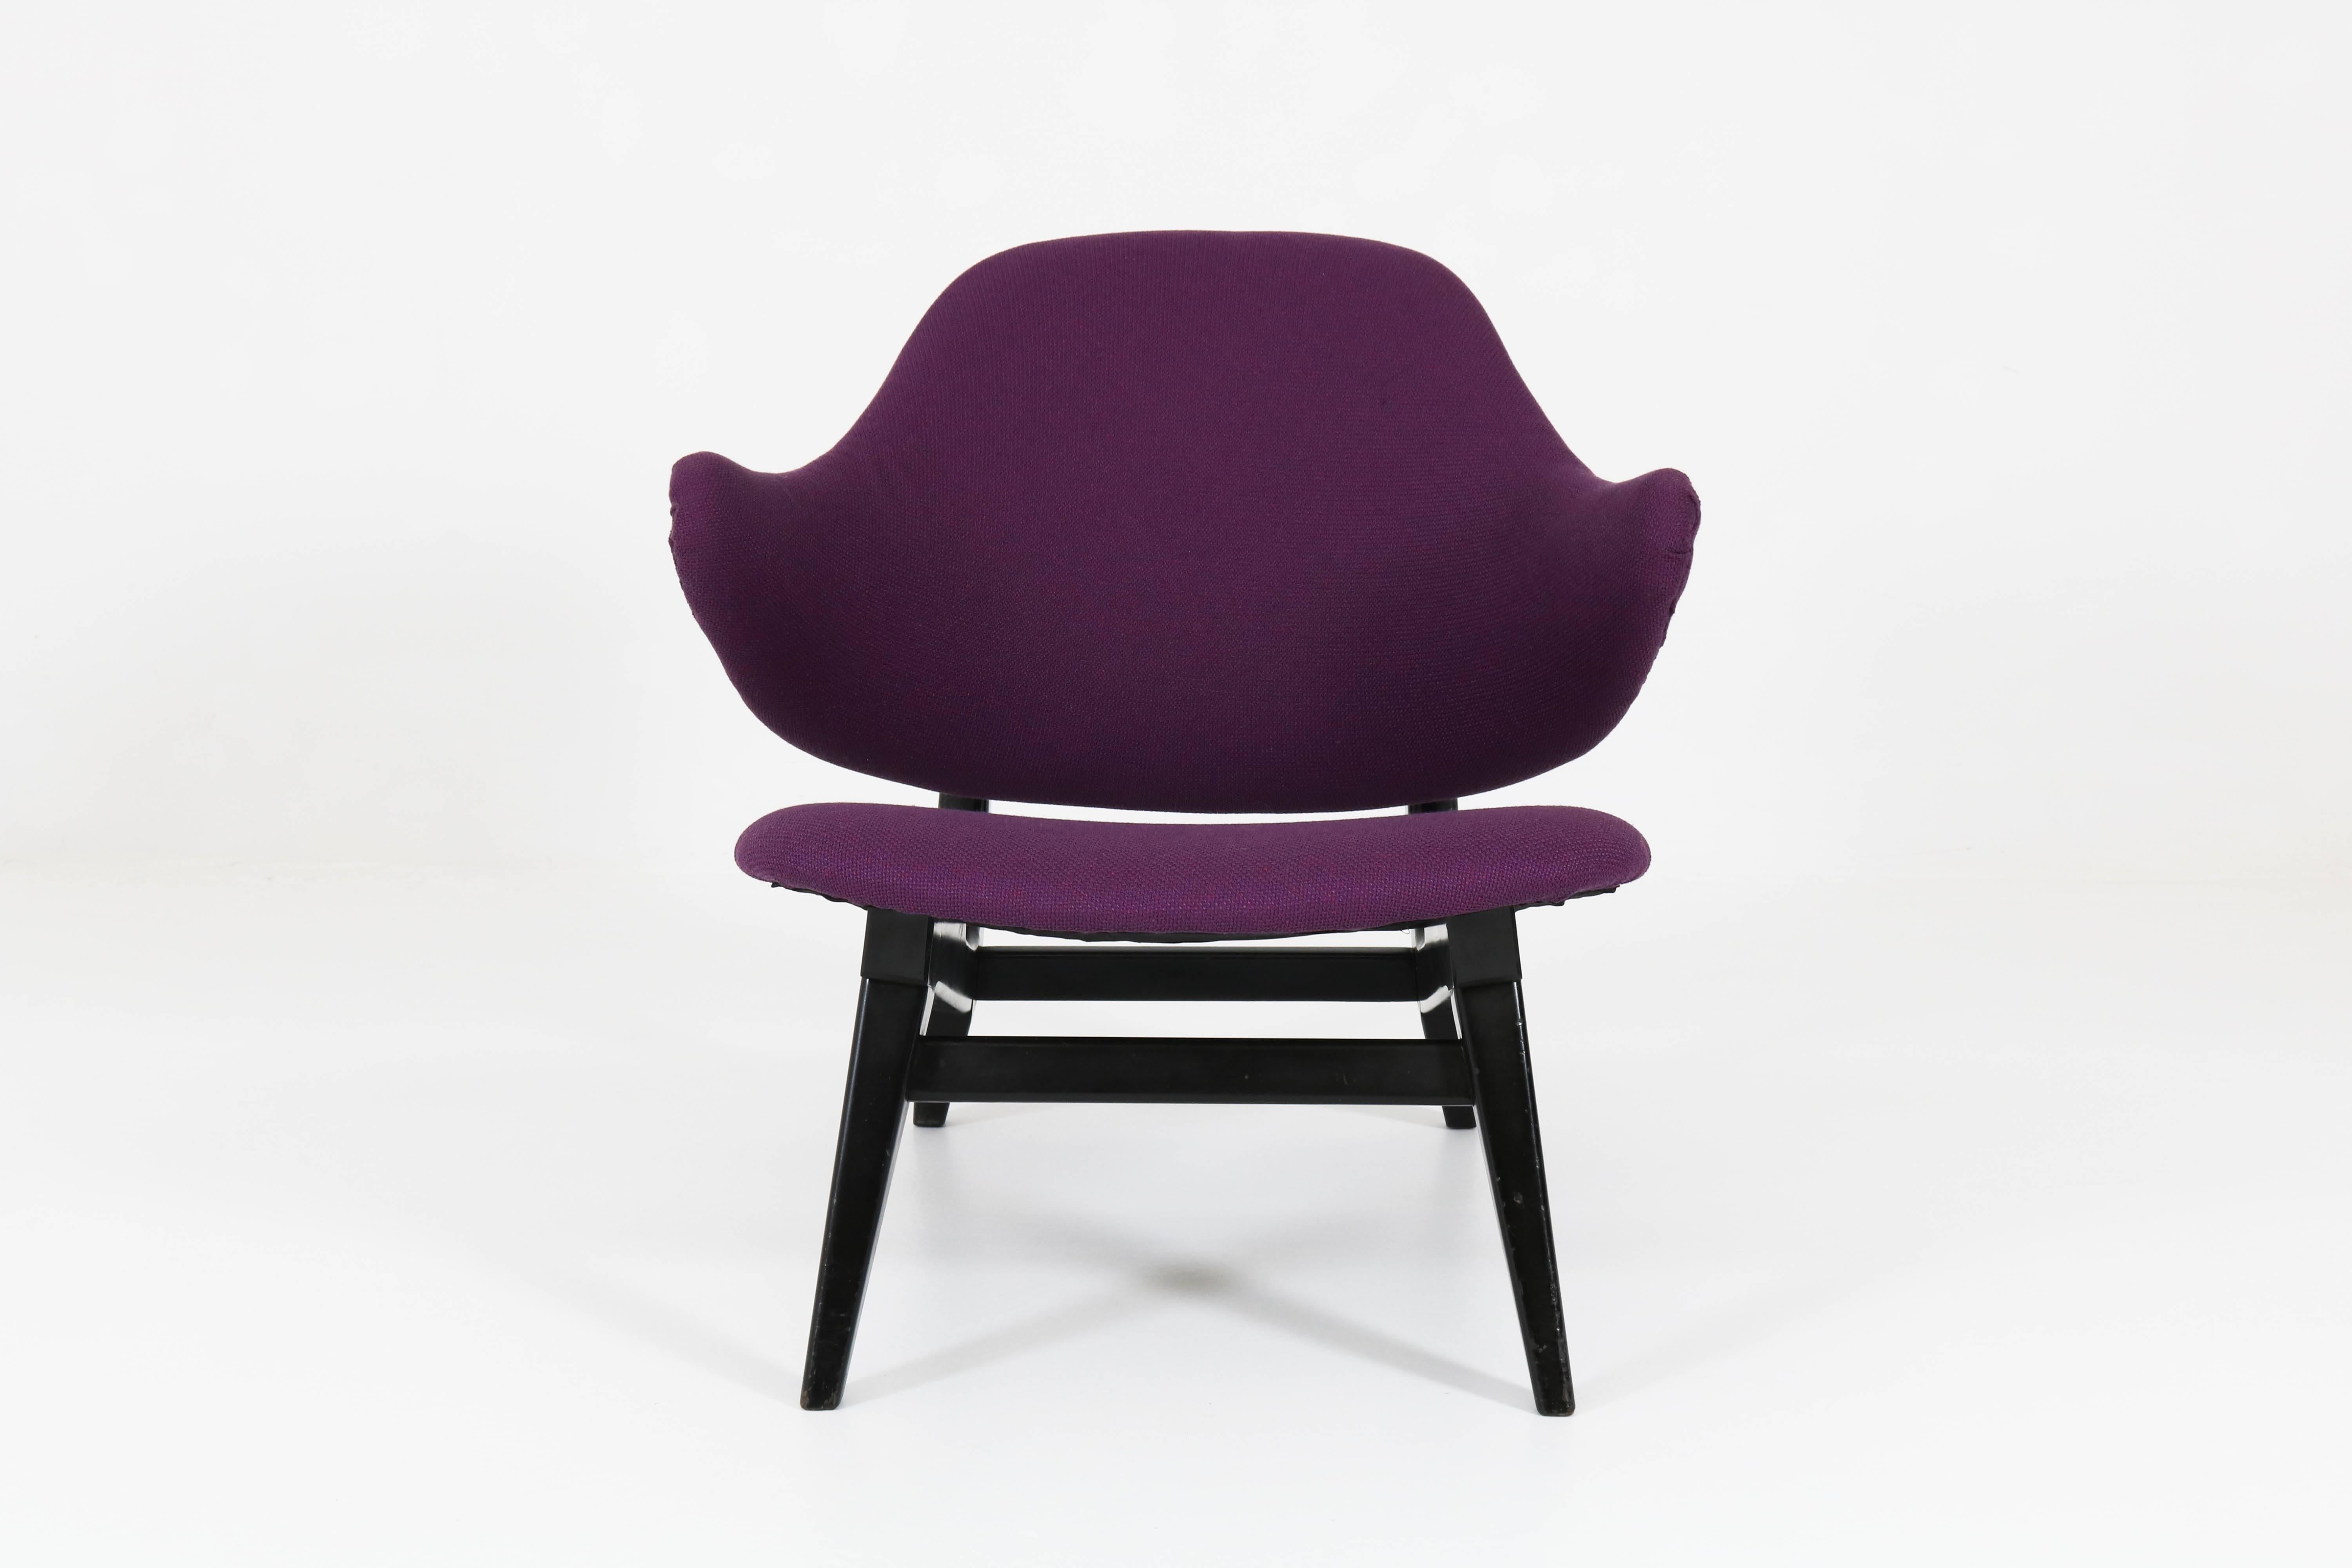 Mid-Century Modern lounge chair by Louis van Teeffelen for WeBe, 1960s.
Striking Dutch design from the sixties.
Original black lacquered wooden frame and re-upholstered with exclusive purple fabric.
In very good original condition with minor wear